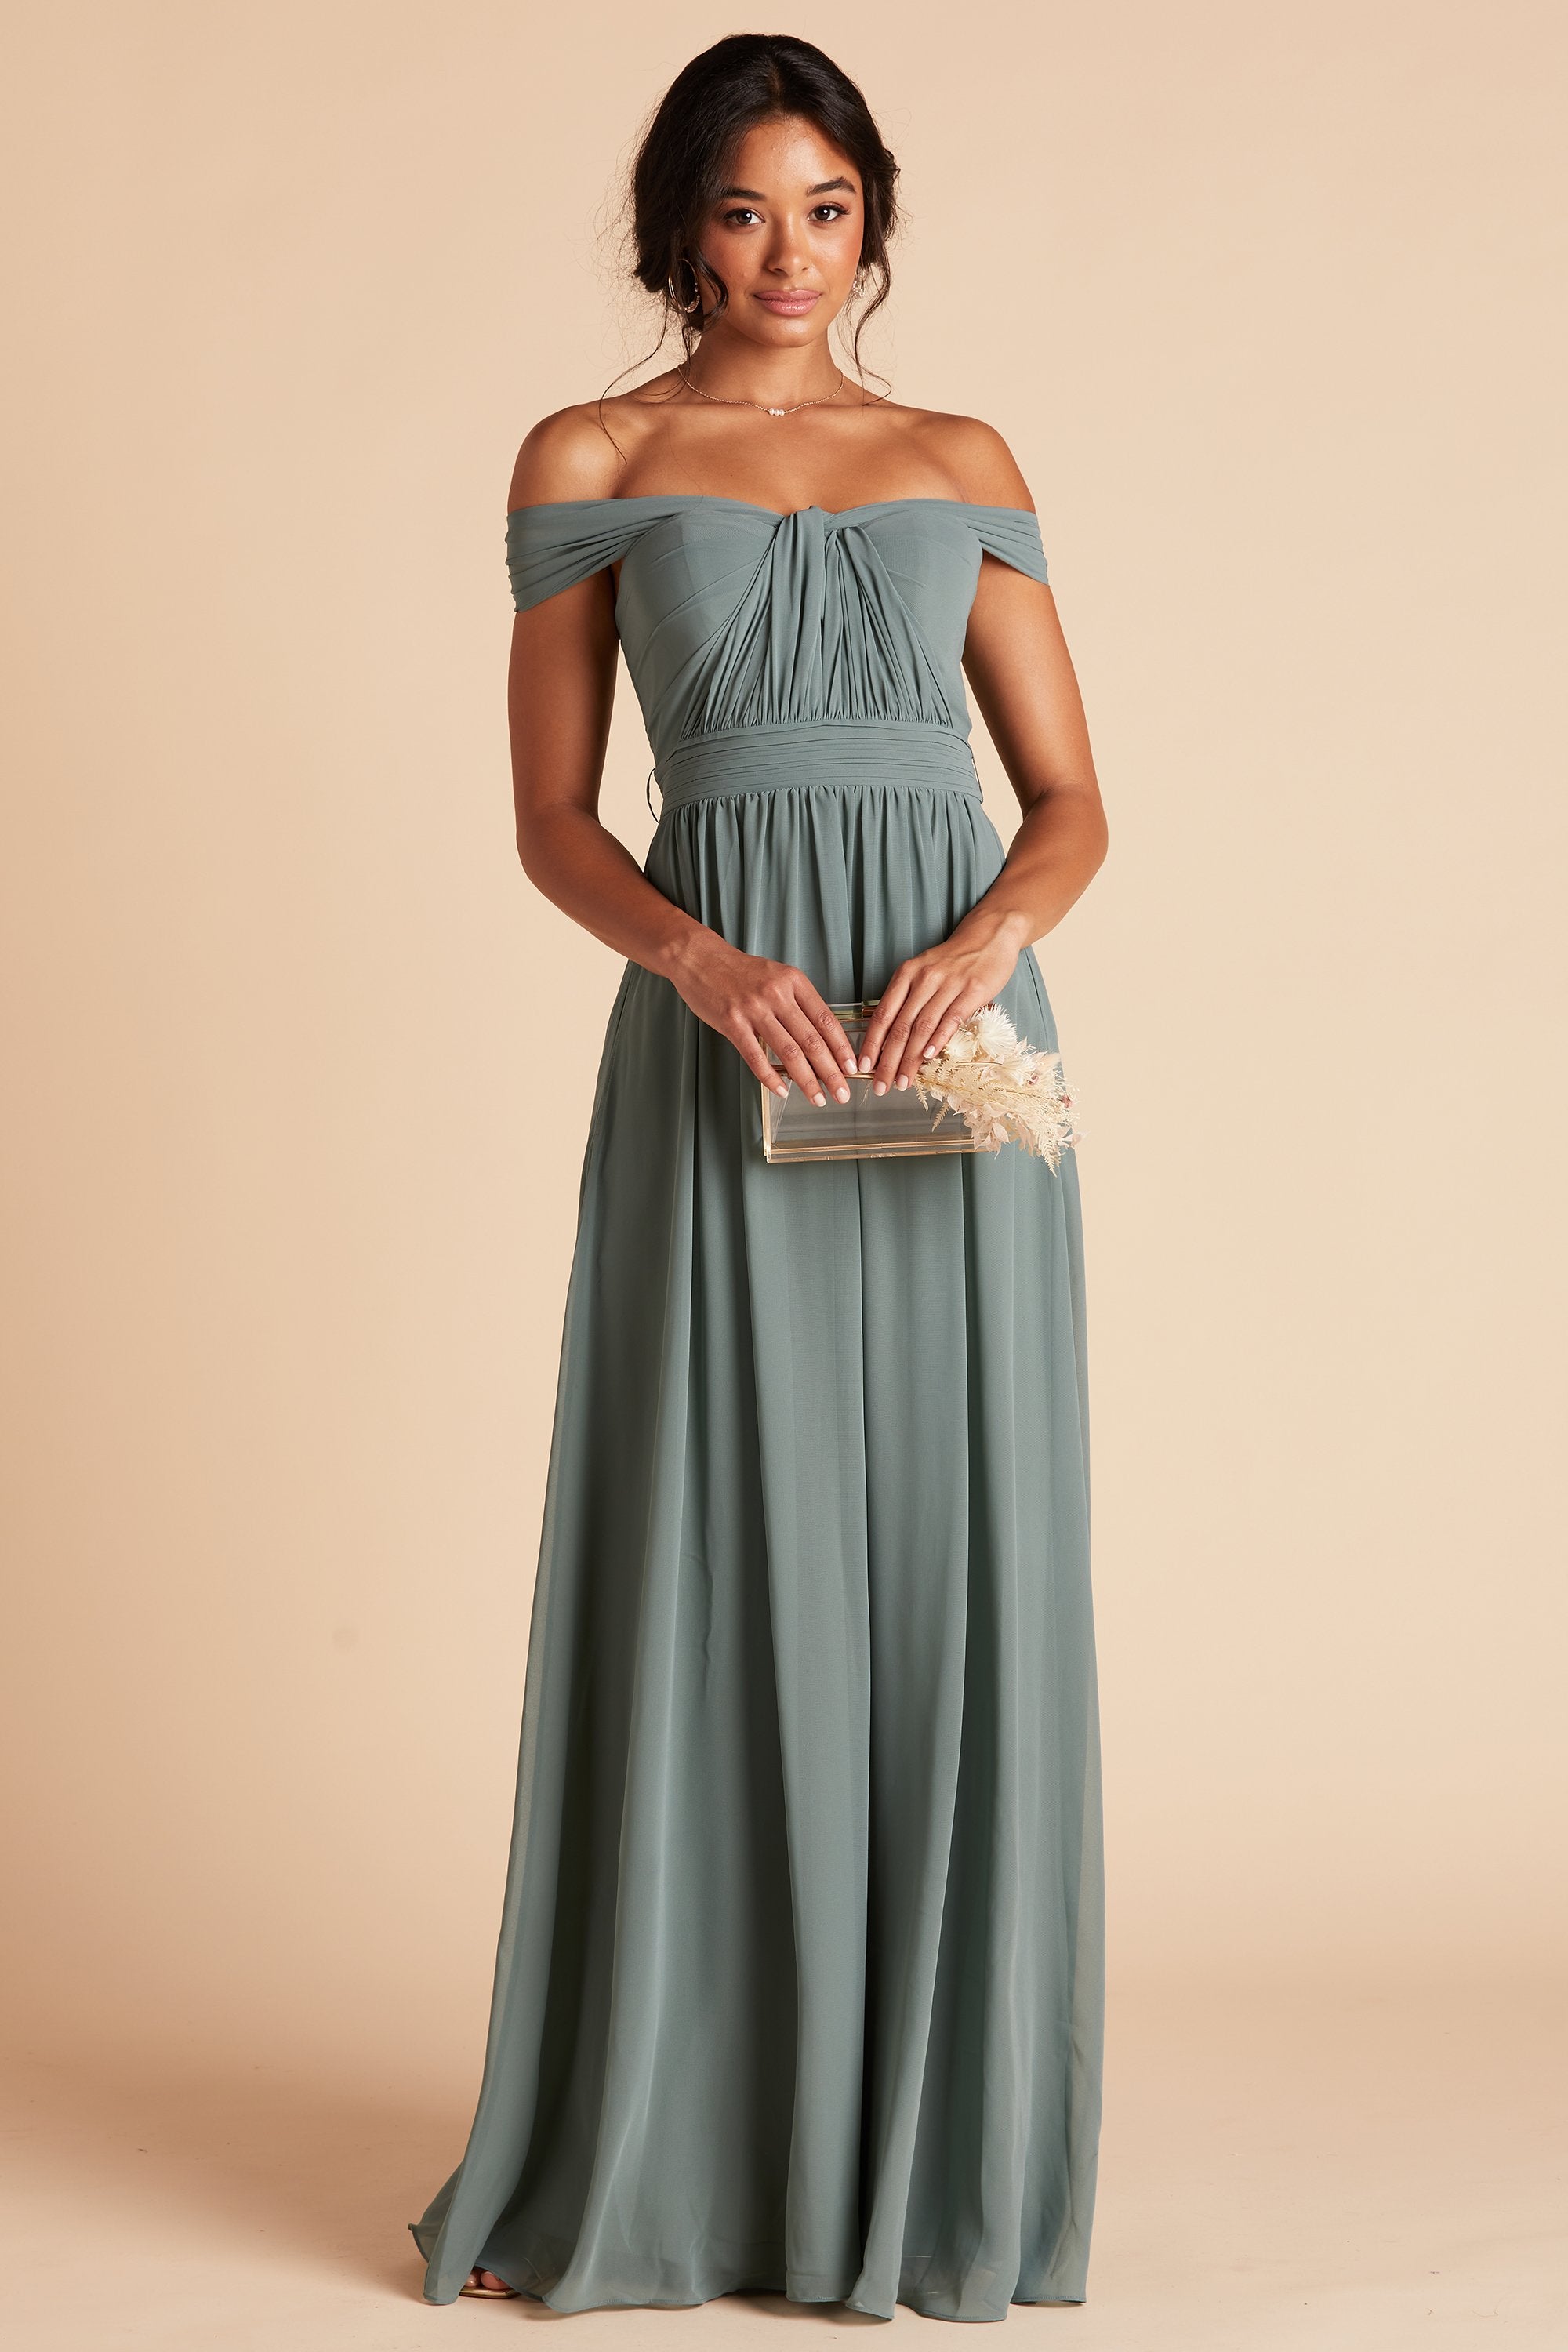 Velvet Ribbon Sash Moss Green - Maternity Wedding Dresses, Evening Wear and  Party Clothes by Tiffany Rose US